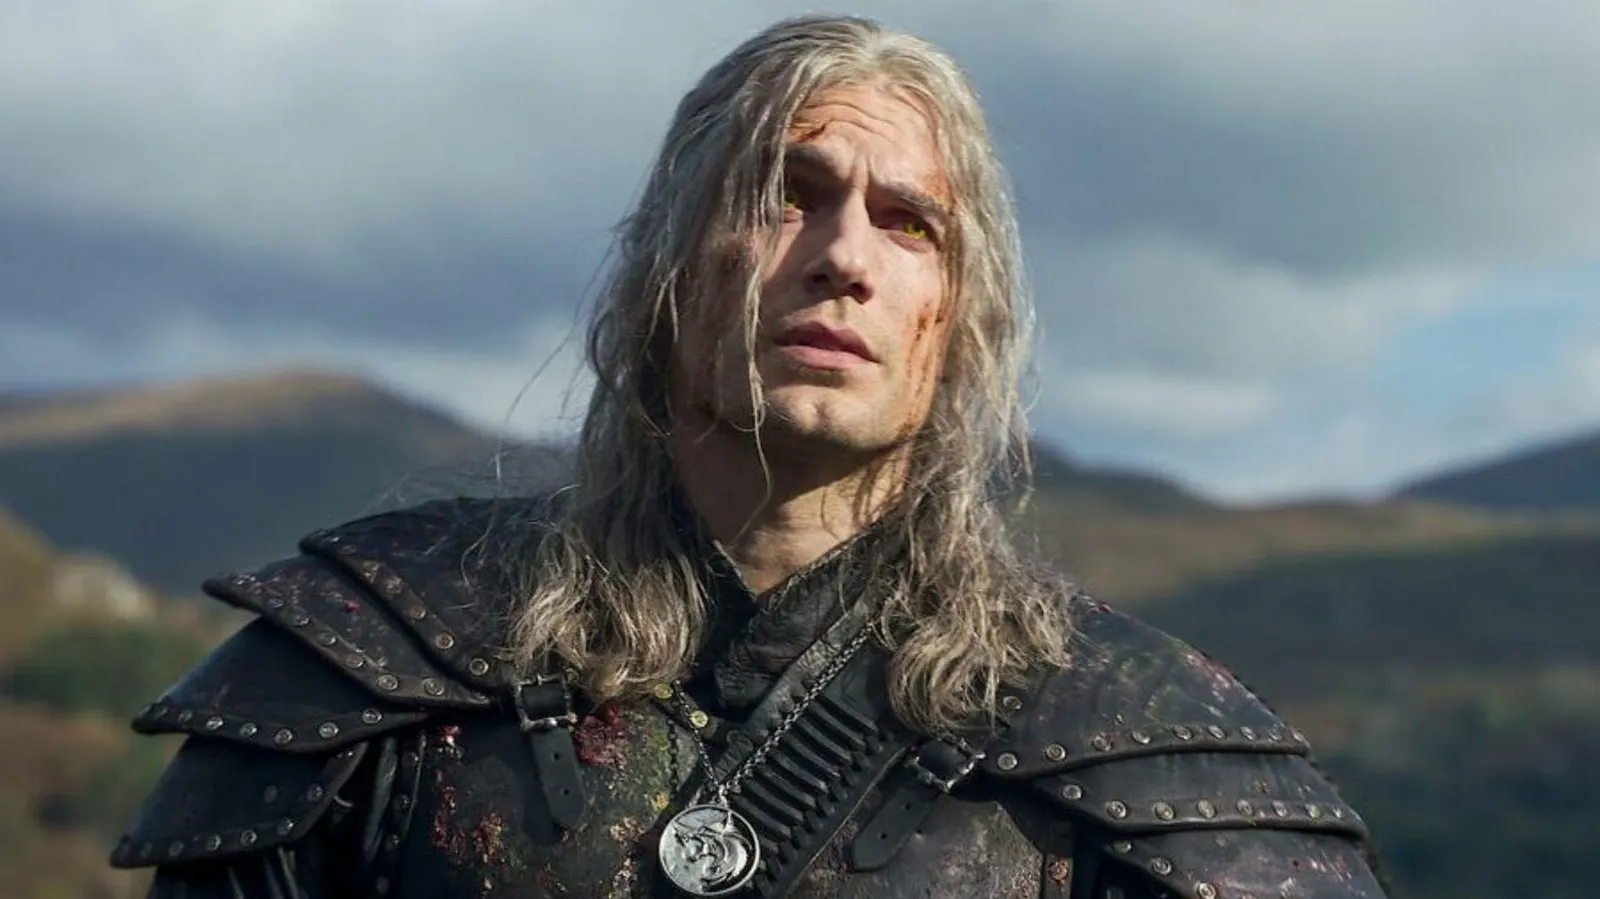 Liam Hemsworth Surprises as The New Witcher: Fans React to His First Look as Geralt